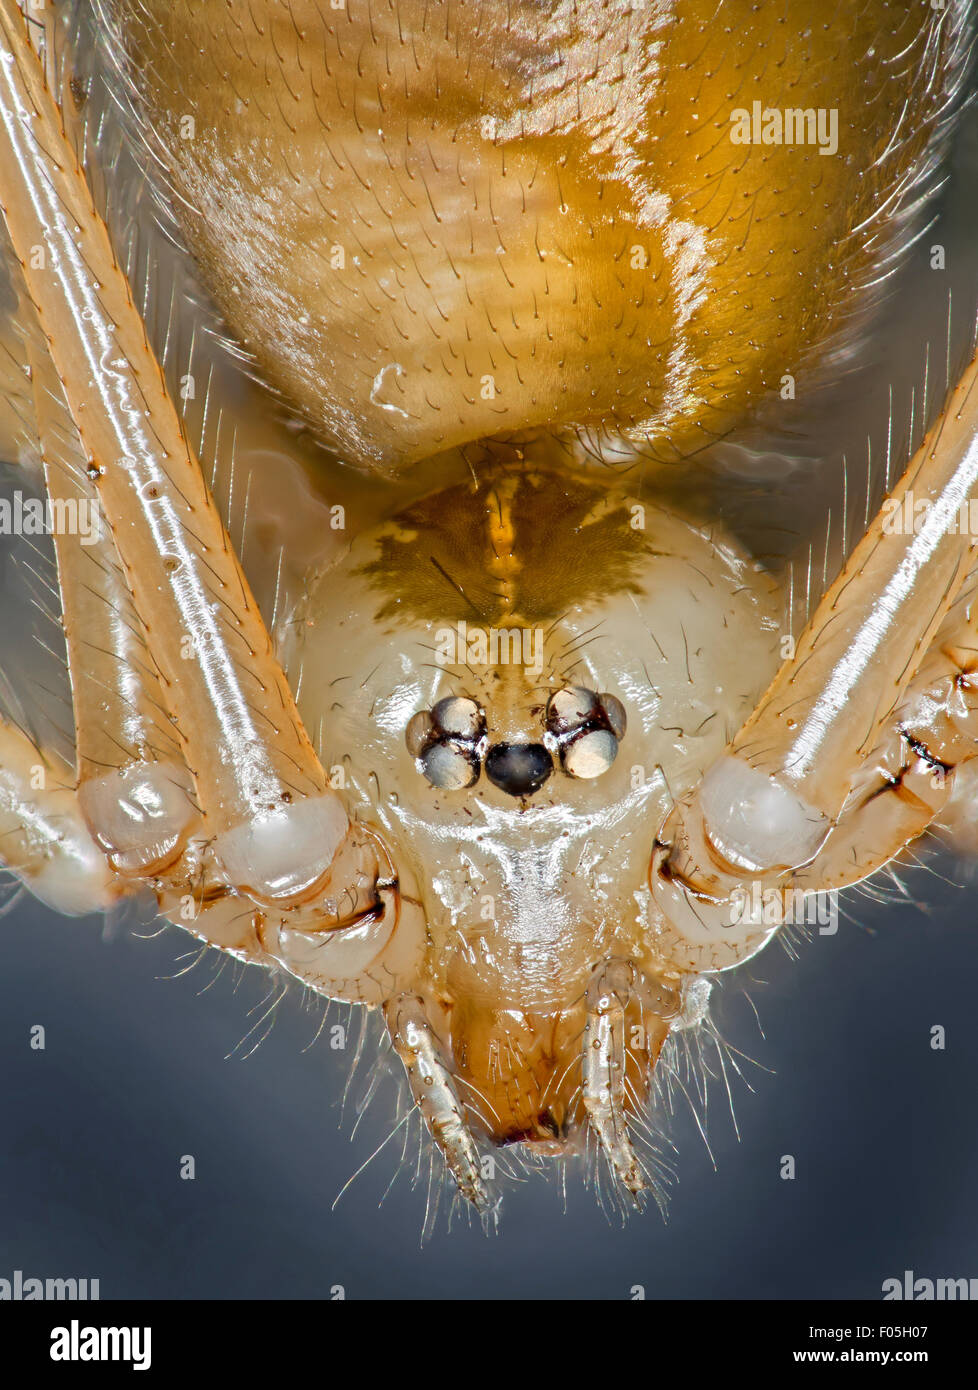 Pholcus phalangioides,daddy long-legs spider, granddaddy long-legs spider, carpenter spider, daddy long-legs, head detail Stock Photo